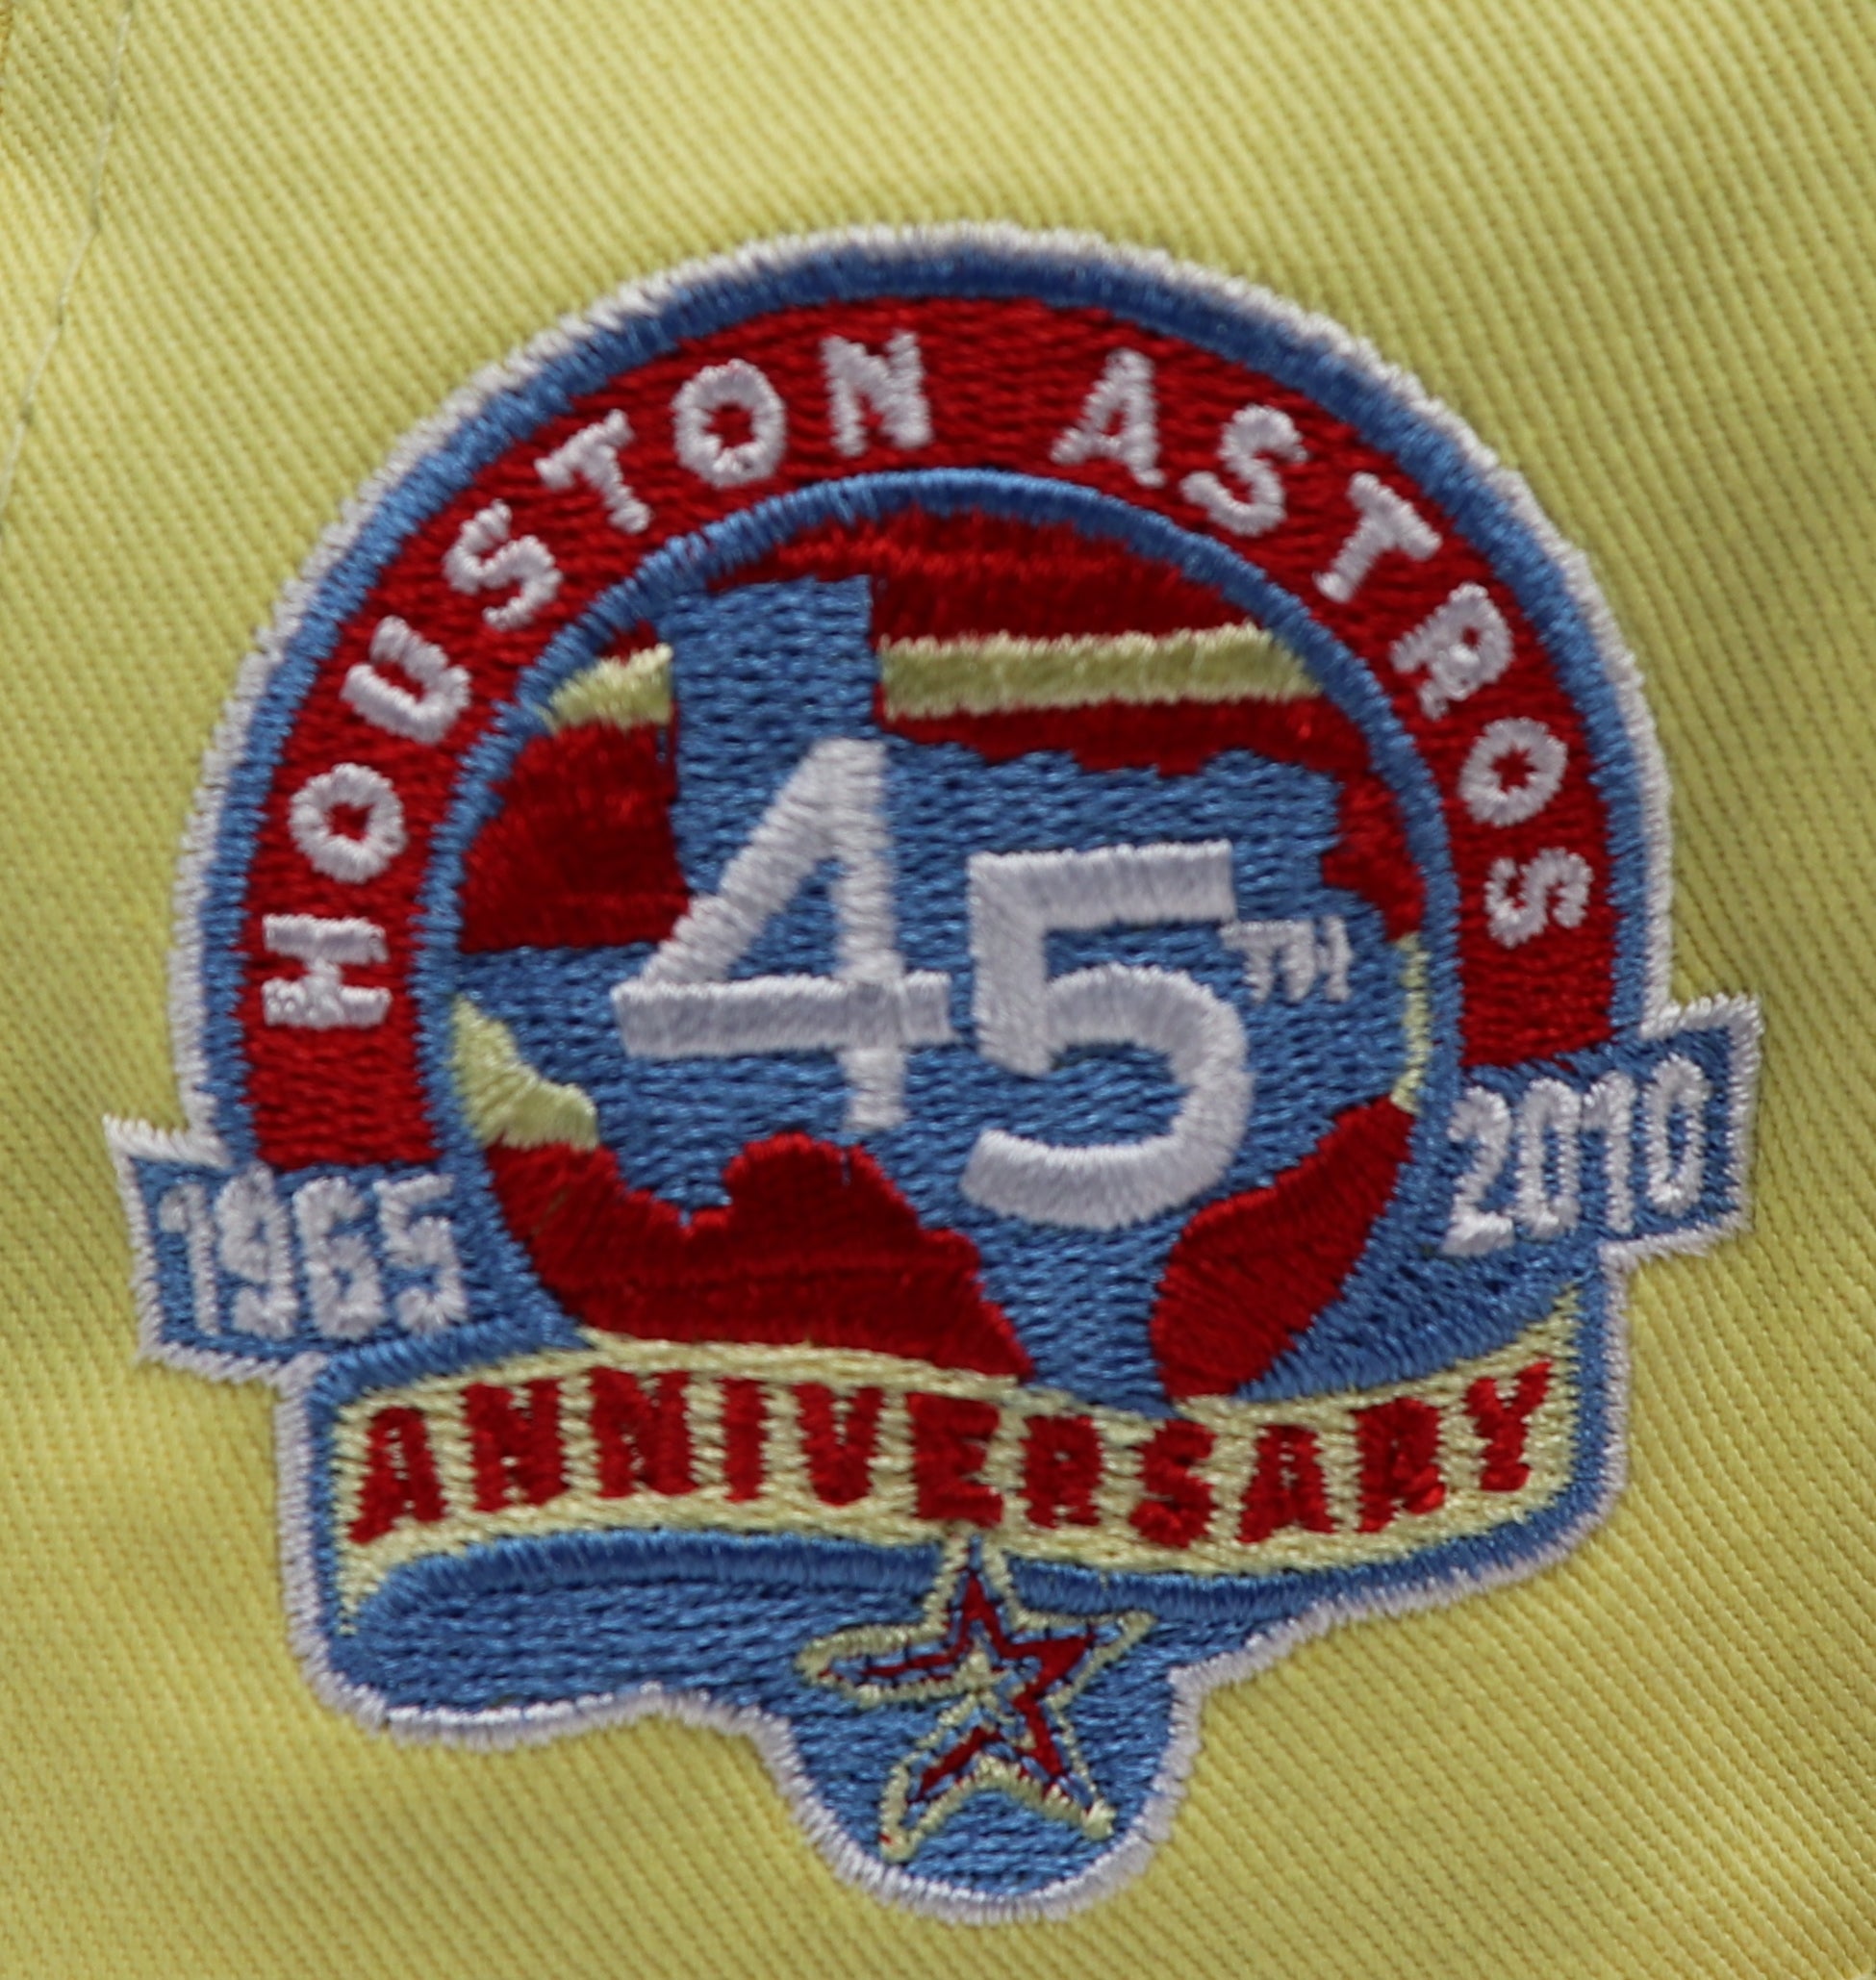 HOUSTON ASTROS (YELLOW) (45TH ANNIVERSARY) (1965-2010) NEW ERA 59FIFTY FITTED (AF-BLUE UNDER VISOR)